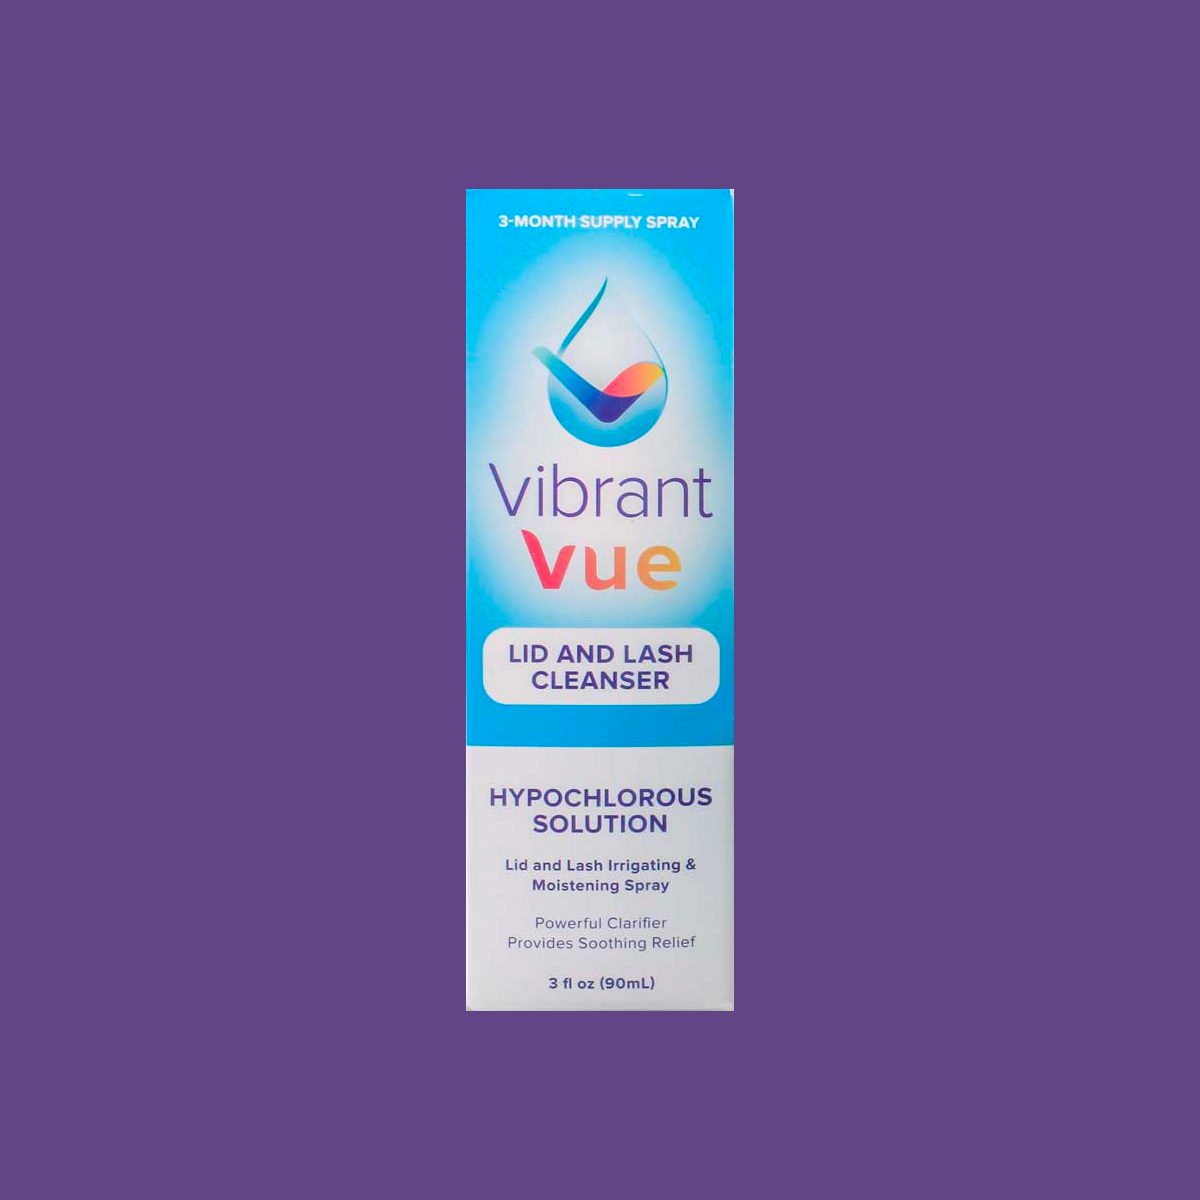 Vibrant Vue Lid and Lash Cleanser, Hypochlorous Solution for Irritated and Dry Eyes (90mL Bottle) 3 Month Supply